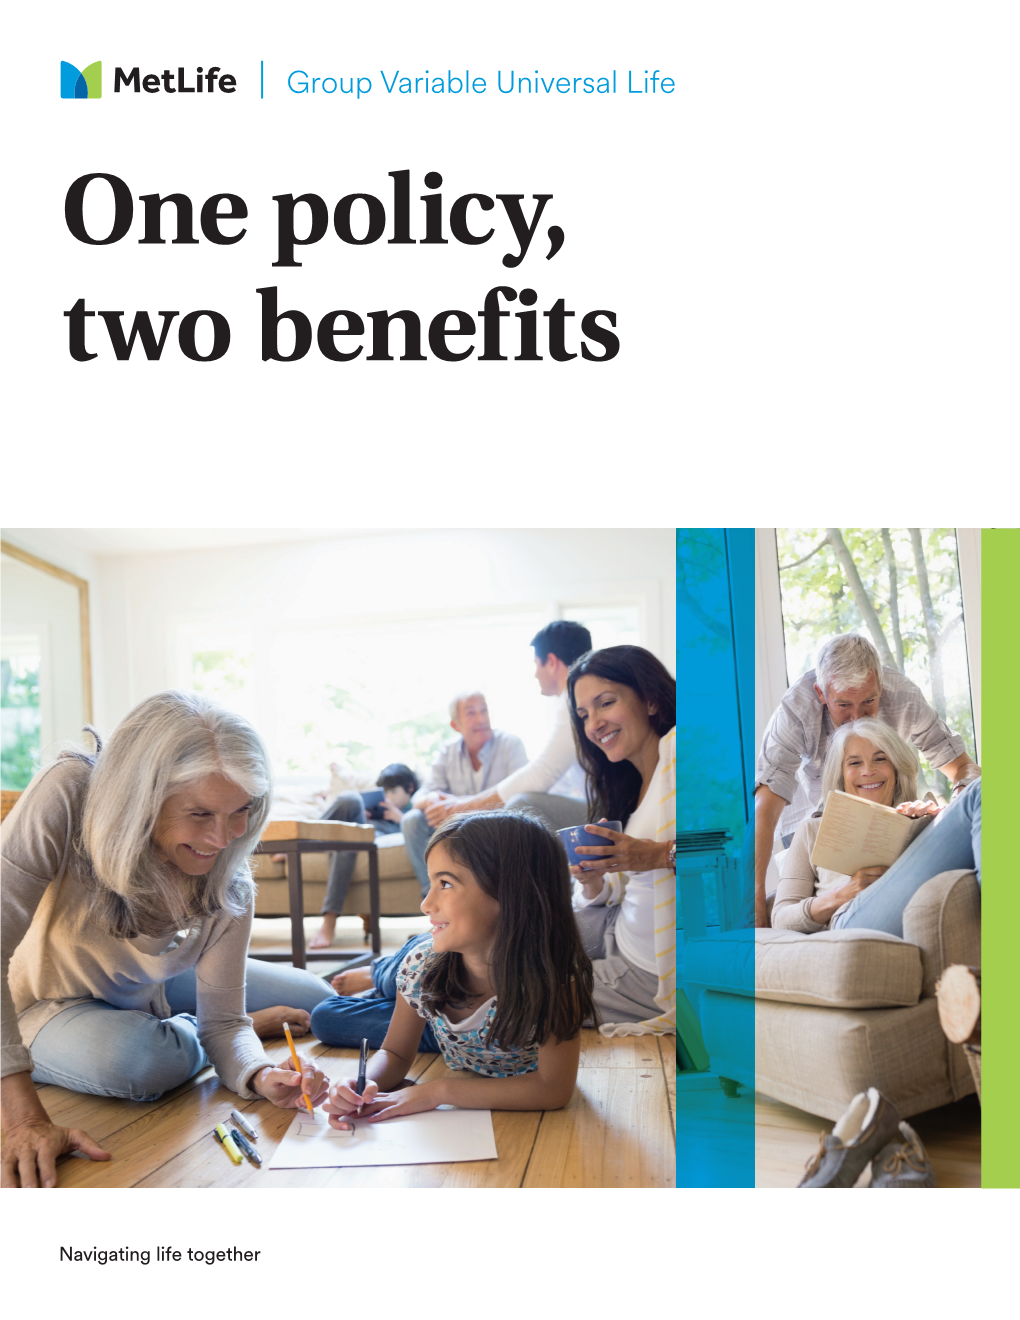 One Policy, Two Benefits Your Group Variable Universal Life (GVUL) Policy Combines Valuable Life Insurance Protection with an Optional Investment Feature